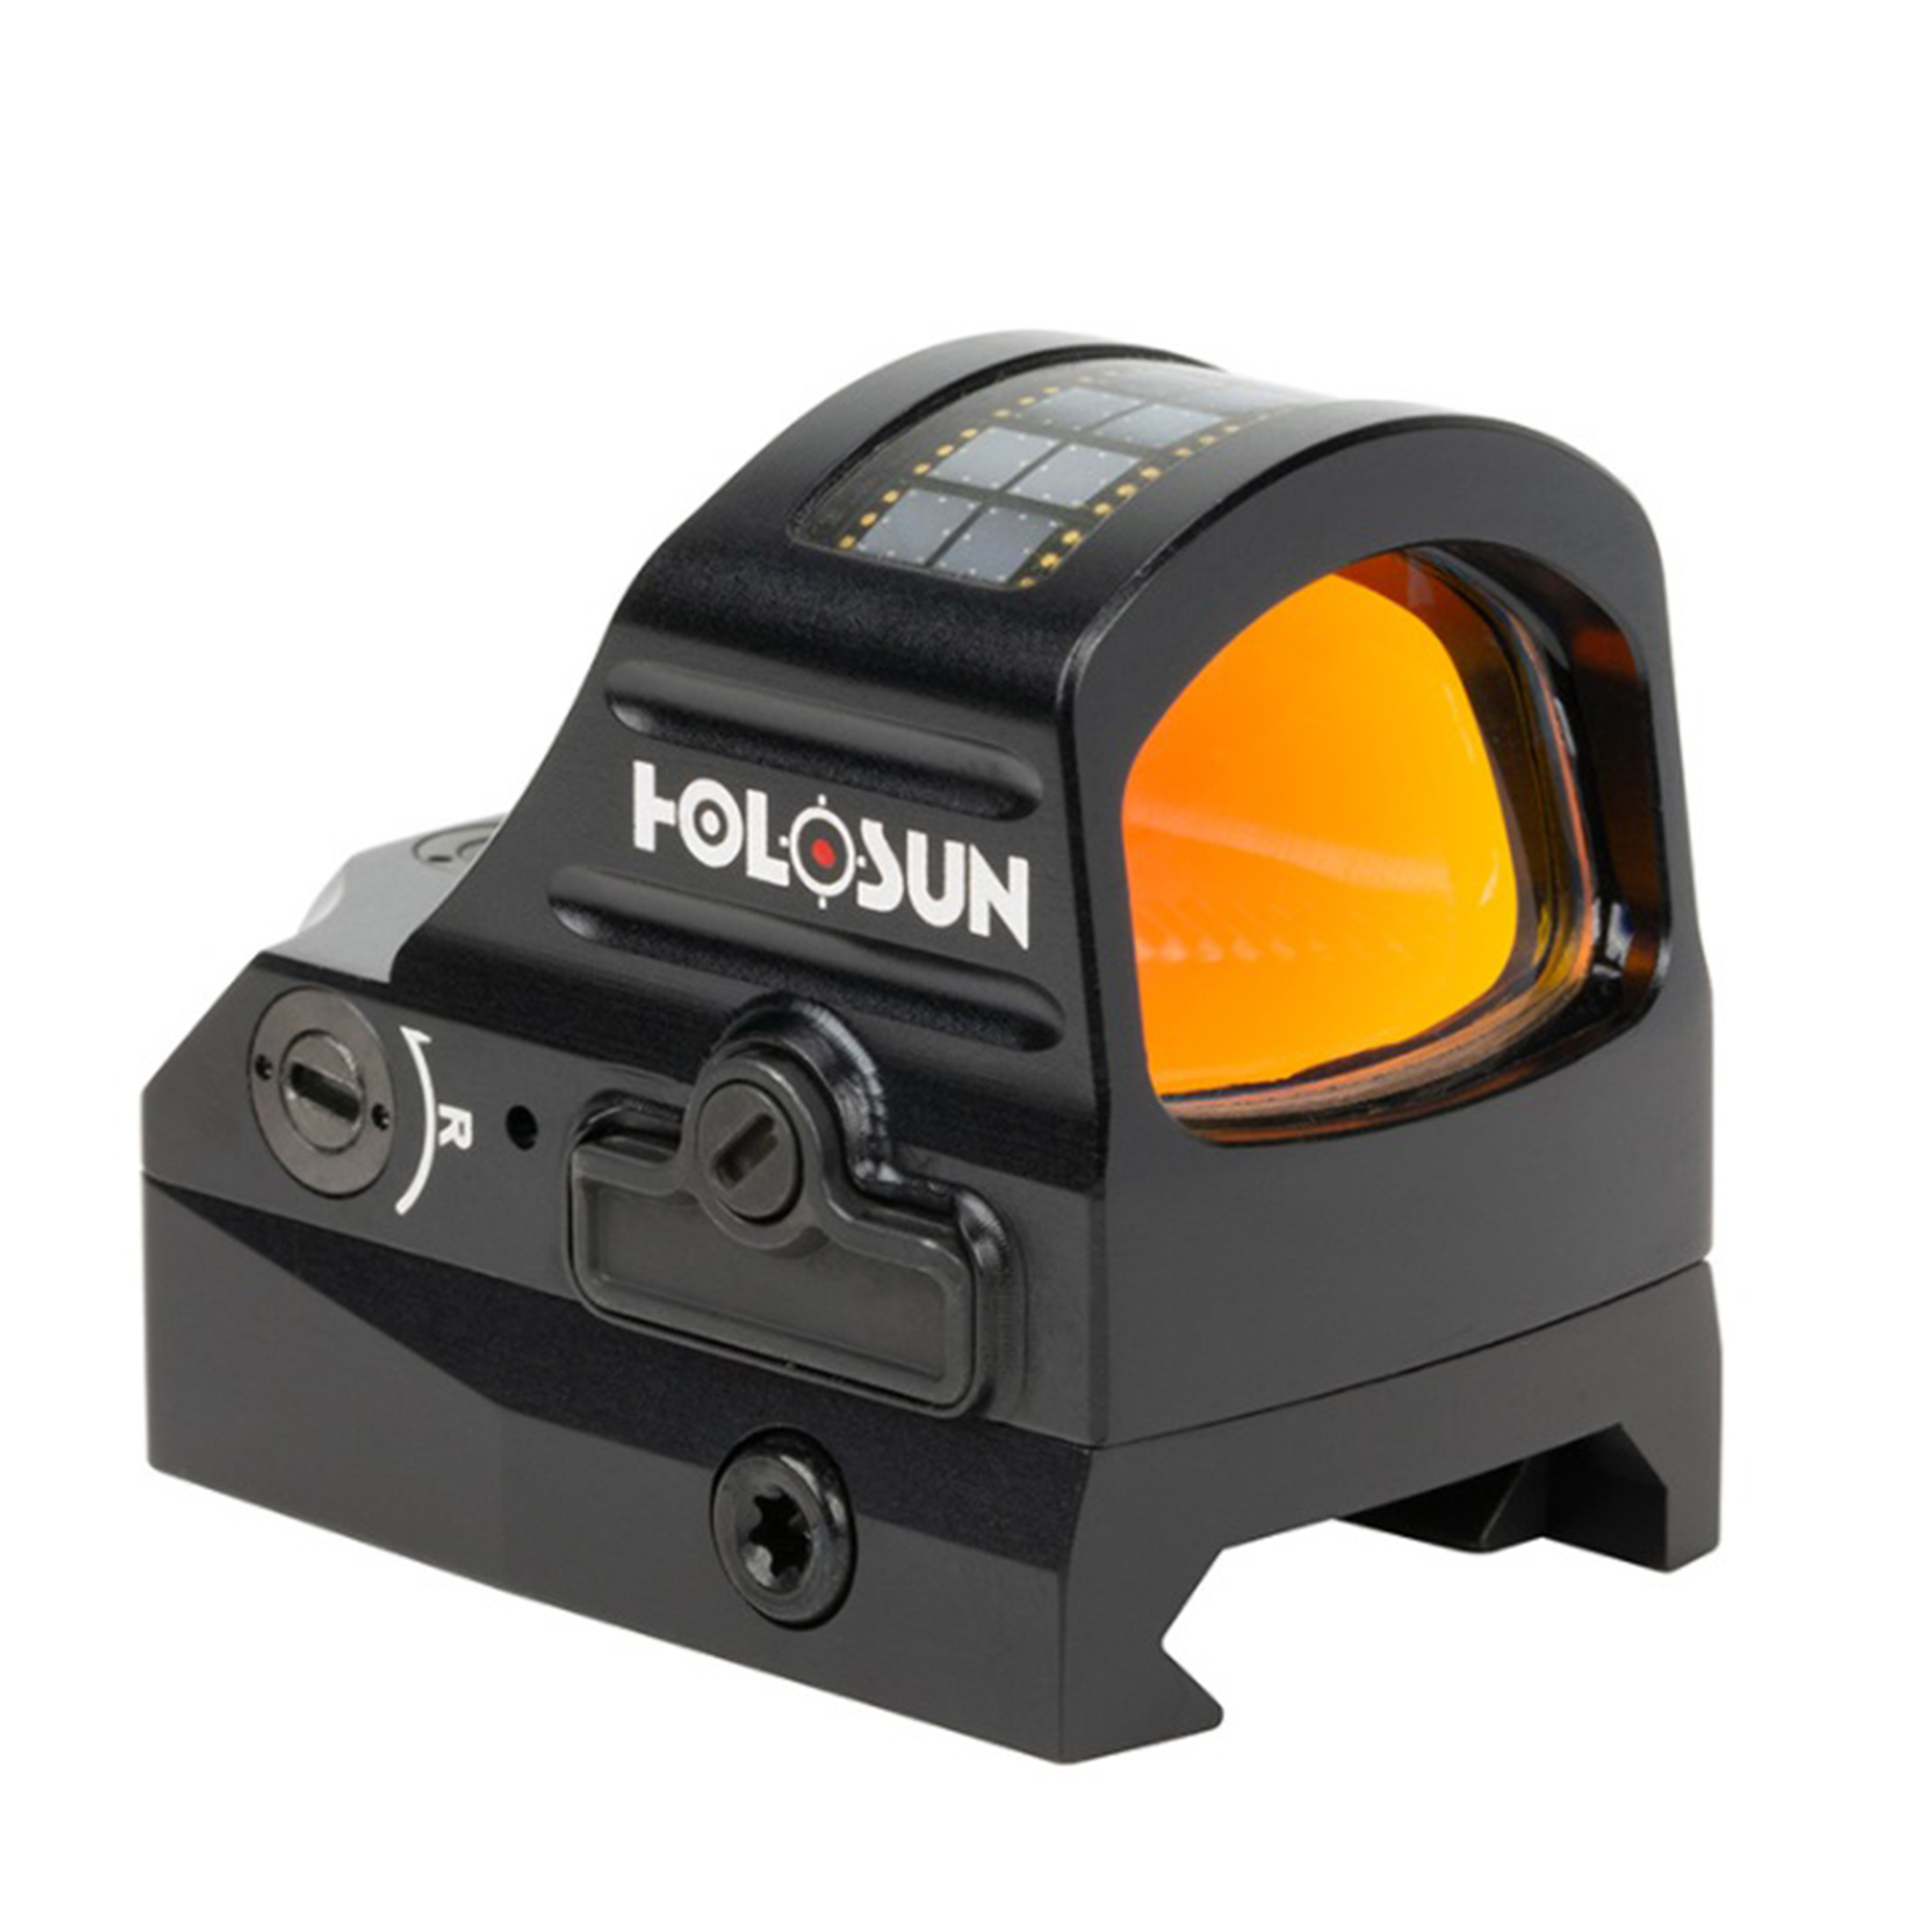 Holosun Open Reflex Dot Sight HE507C-GR-X2 with switchable reticle, green dot sight, hunting, airso…